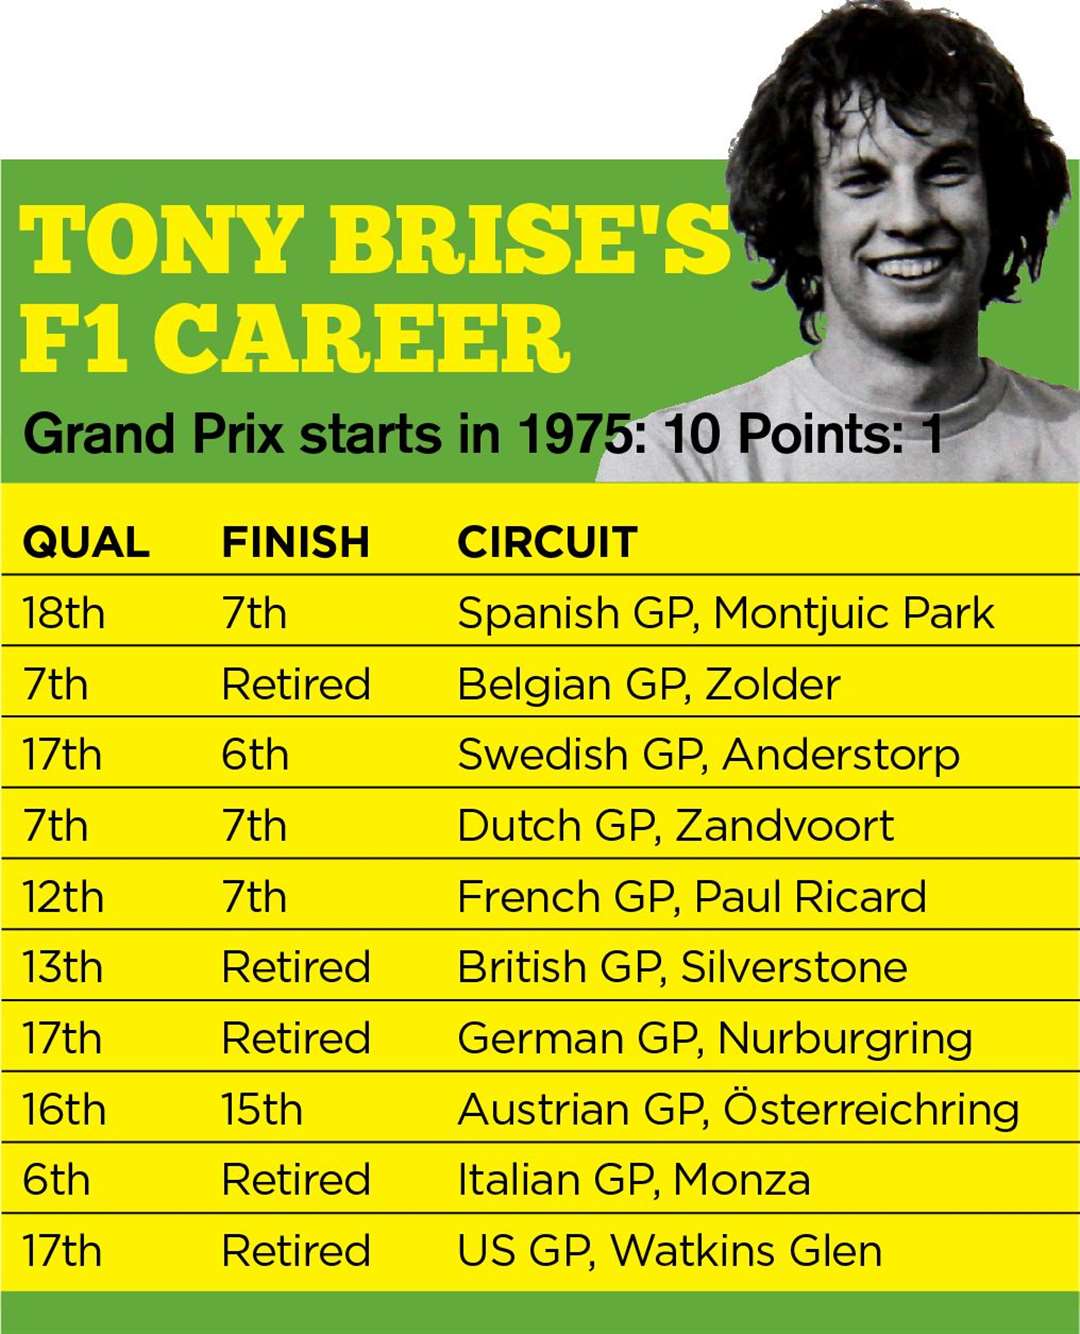 Brise's all-too-brief F1 career was full of highs and lows. He achieved his only point at the Swedish GP but other races with Embassy Hill featured difficult qualifying sessions and retirements